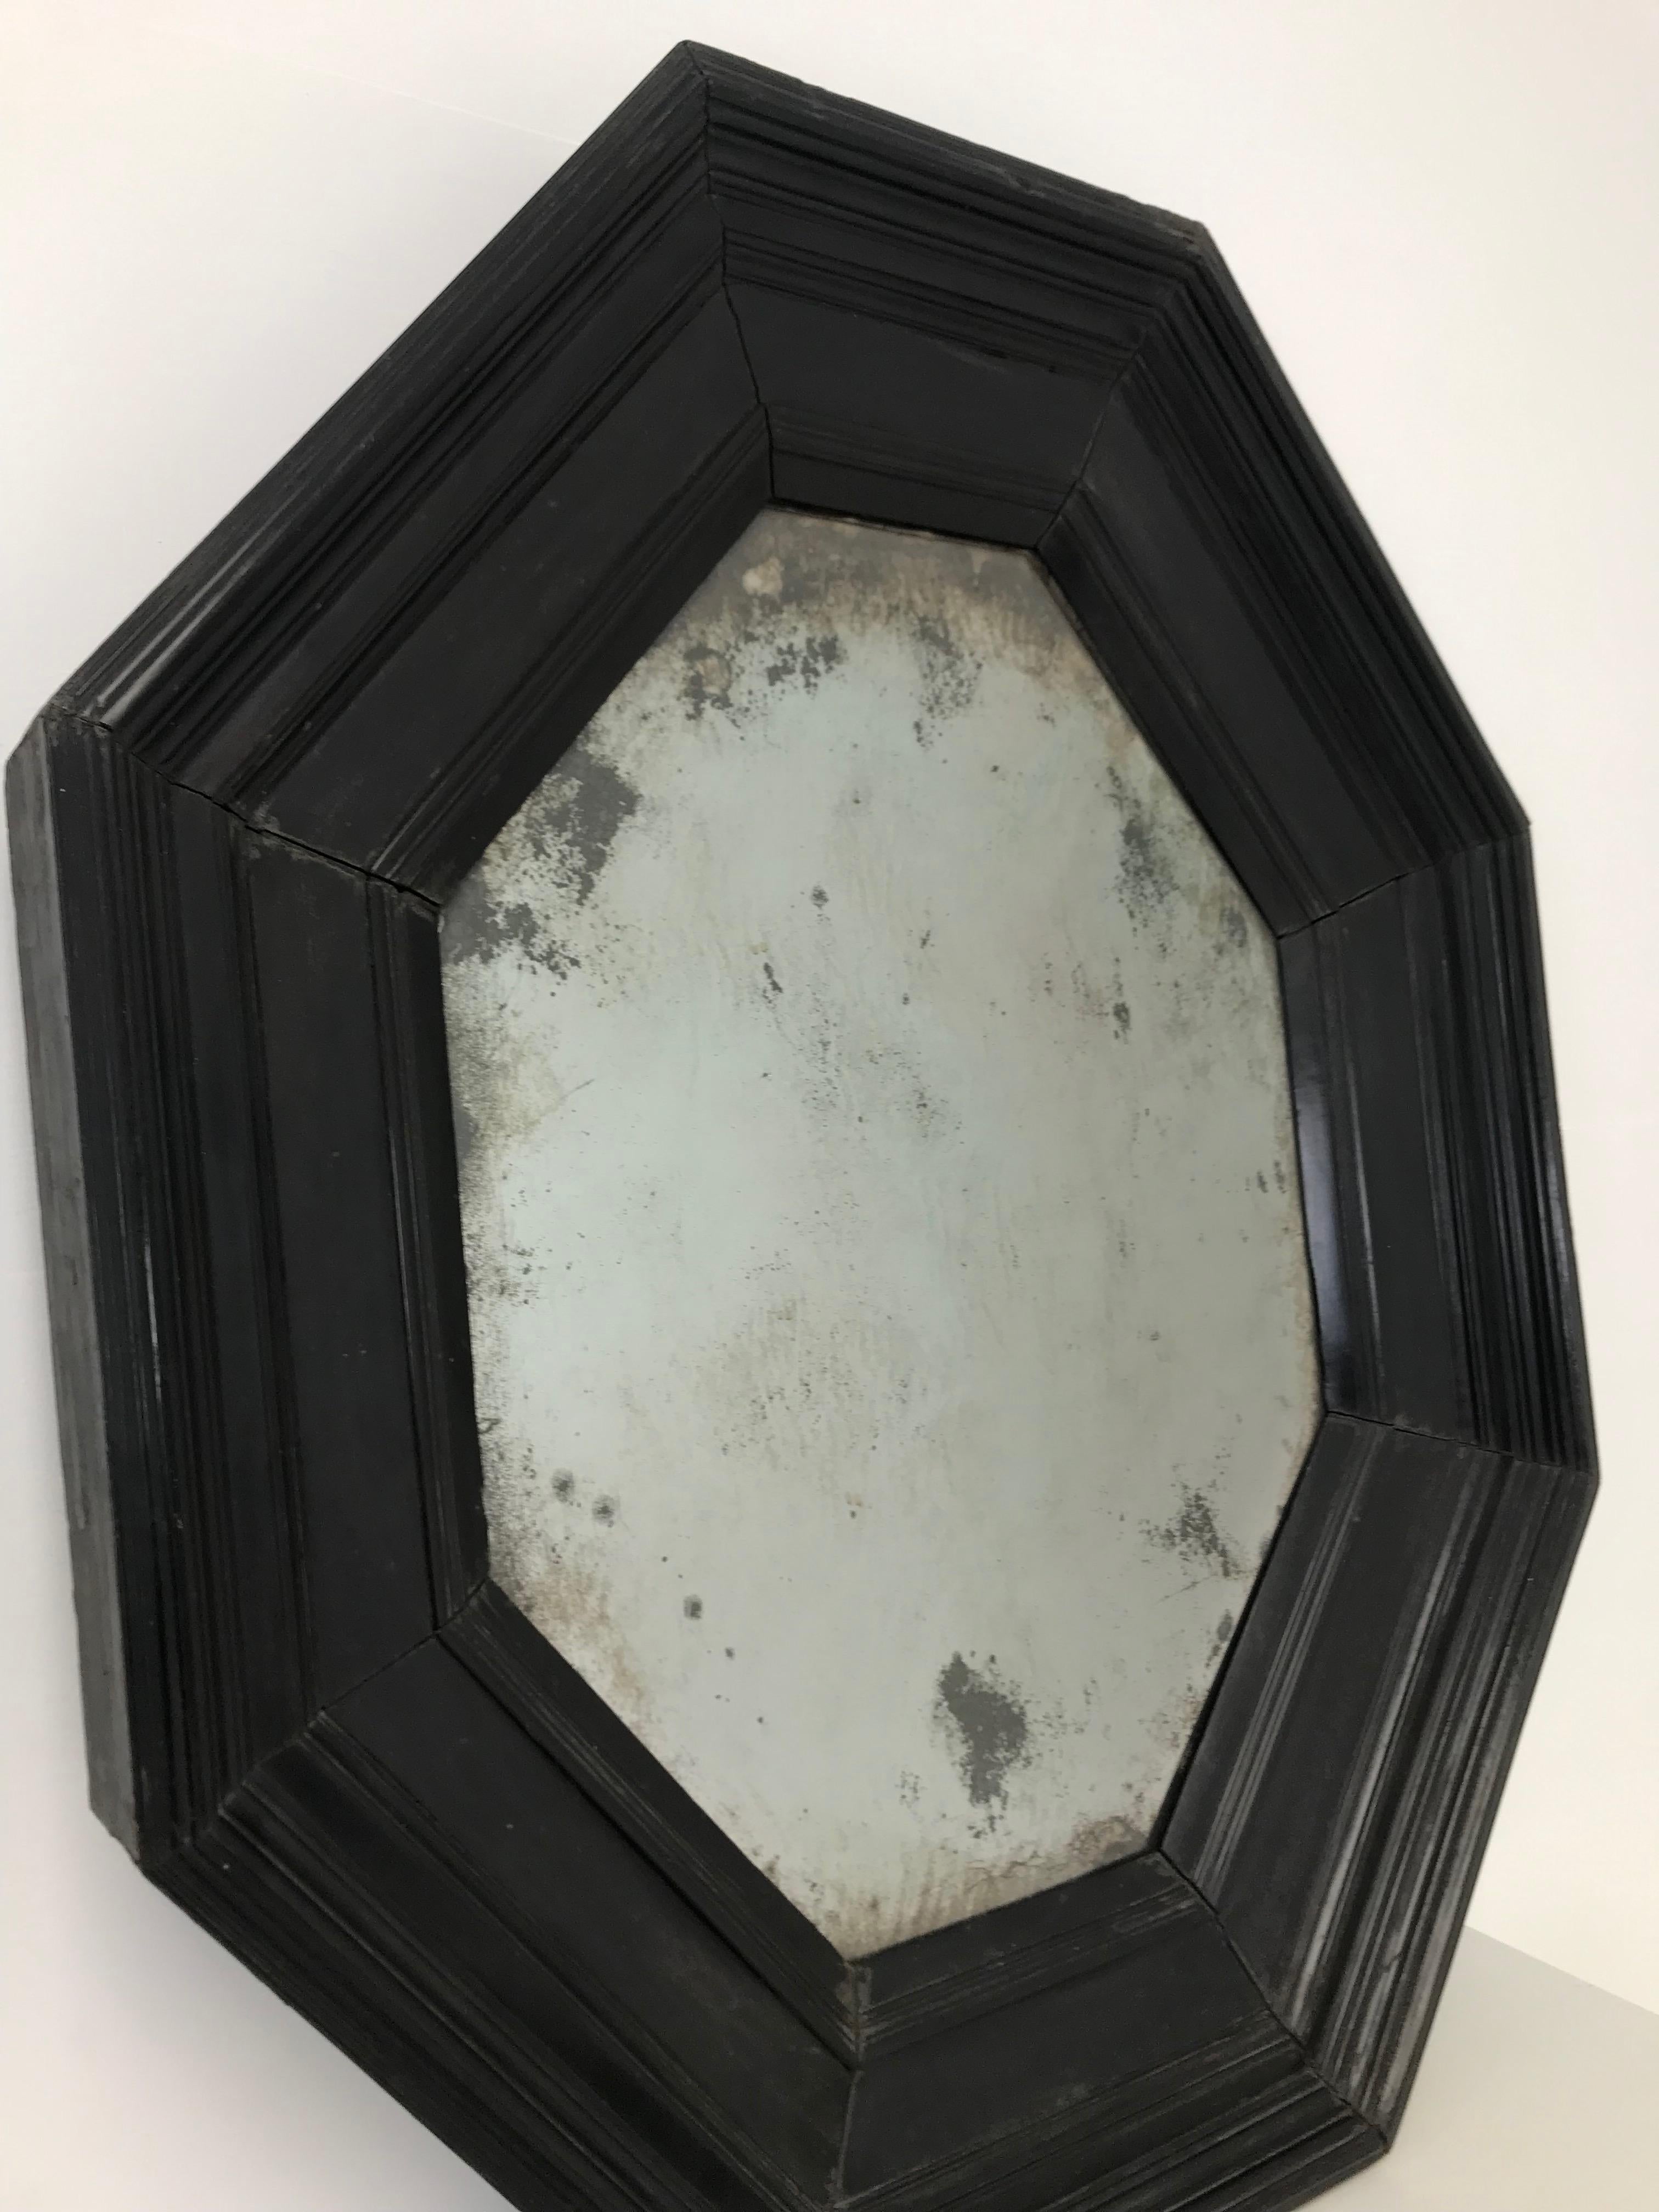 Elegant, exceptional octogonal mirror Italian mirror
18th century
Good patina
Marked, stamped CS at the back and on the side.